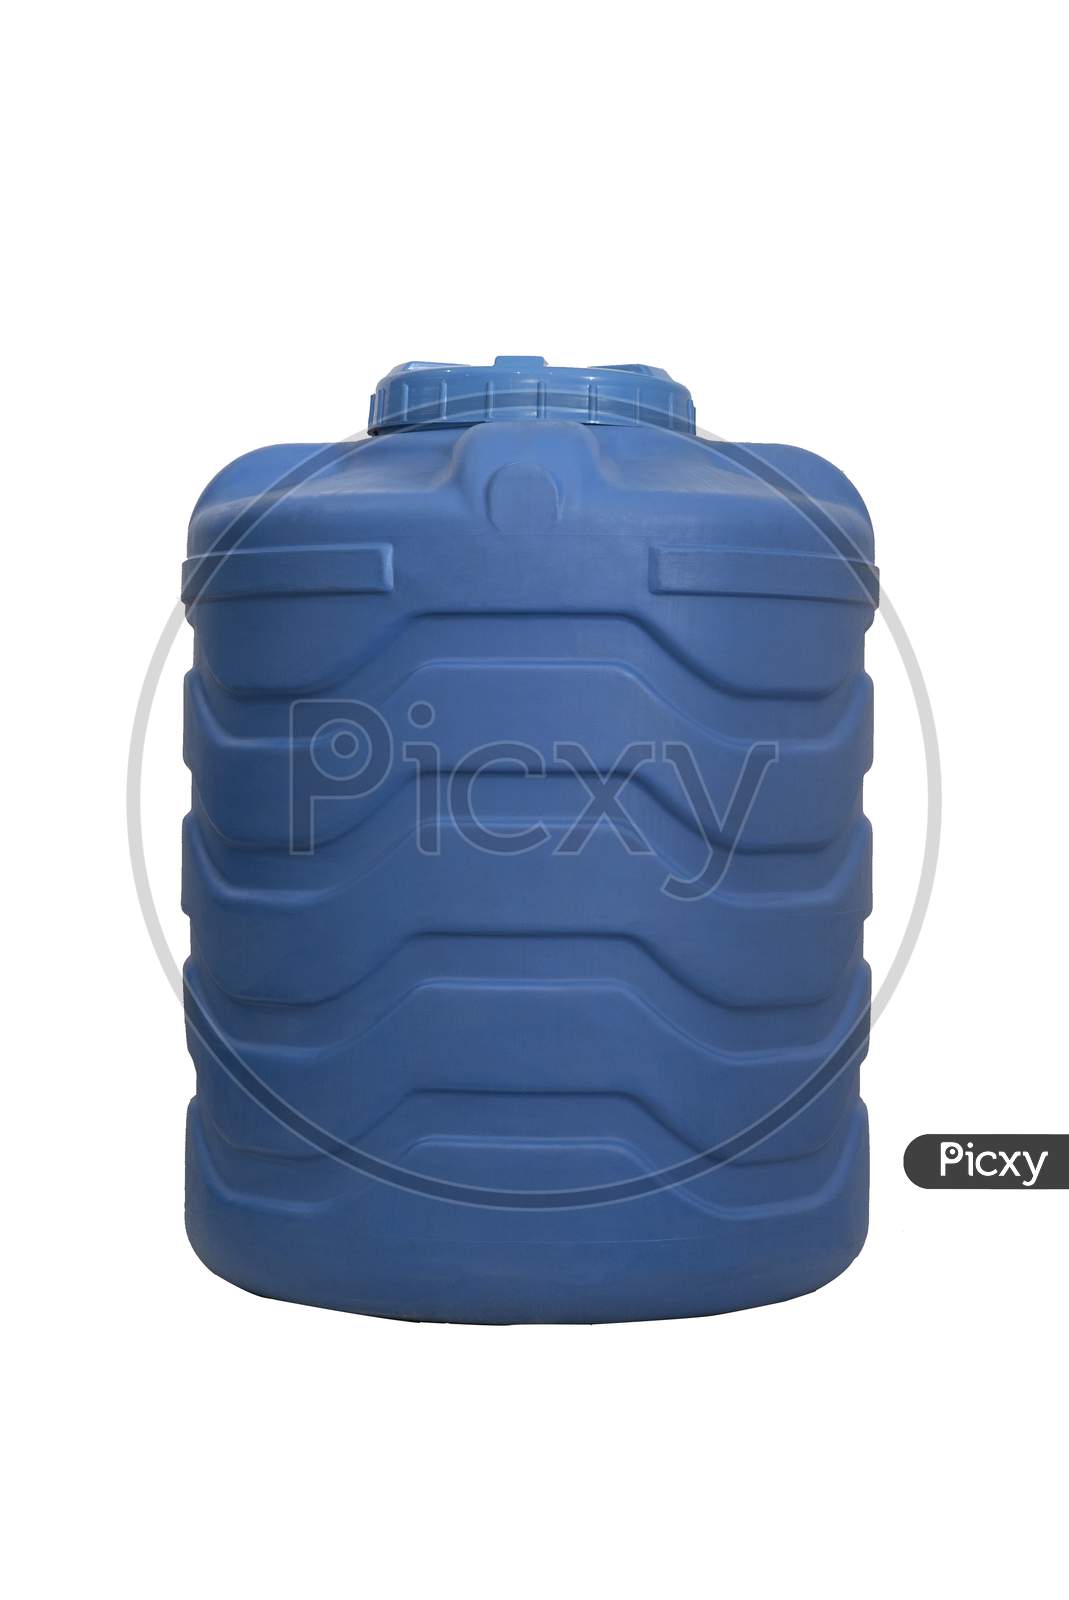 plastic water tank product images